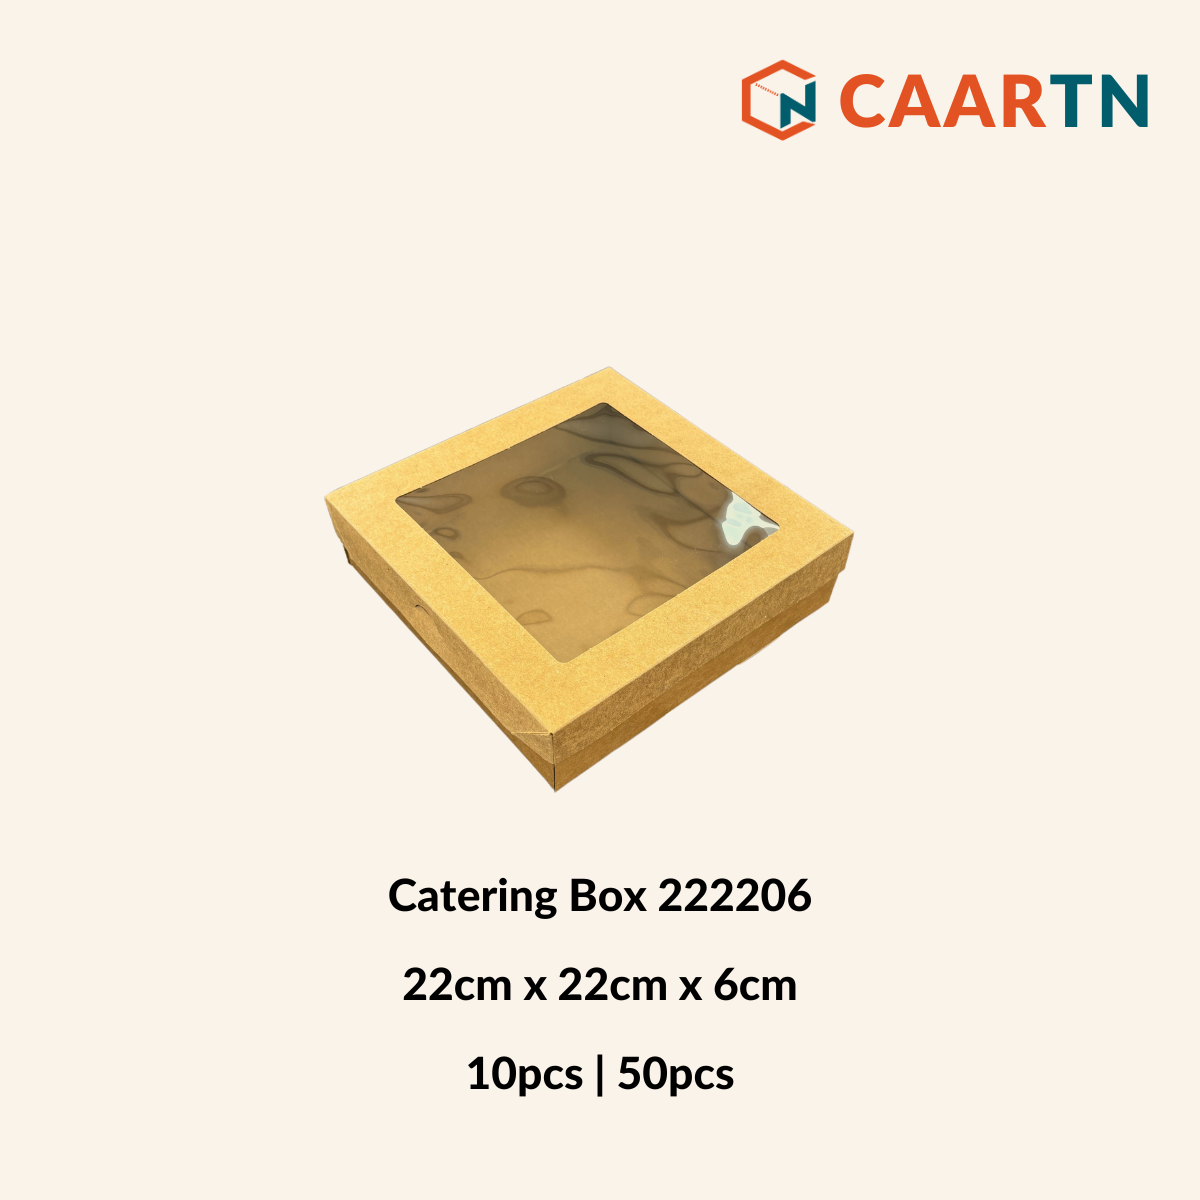 Catering Box 222206